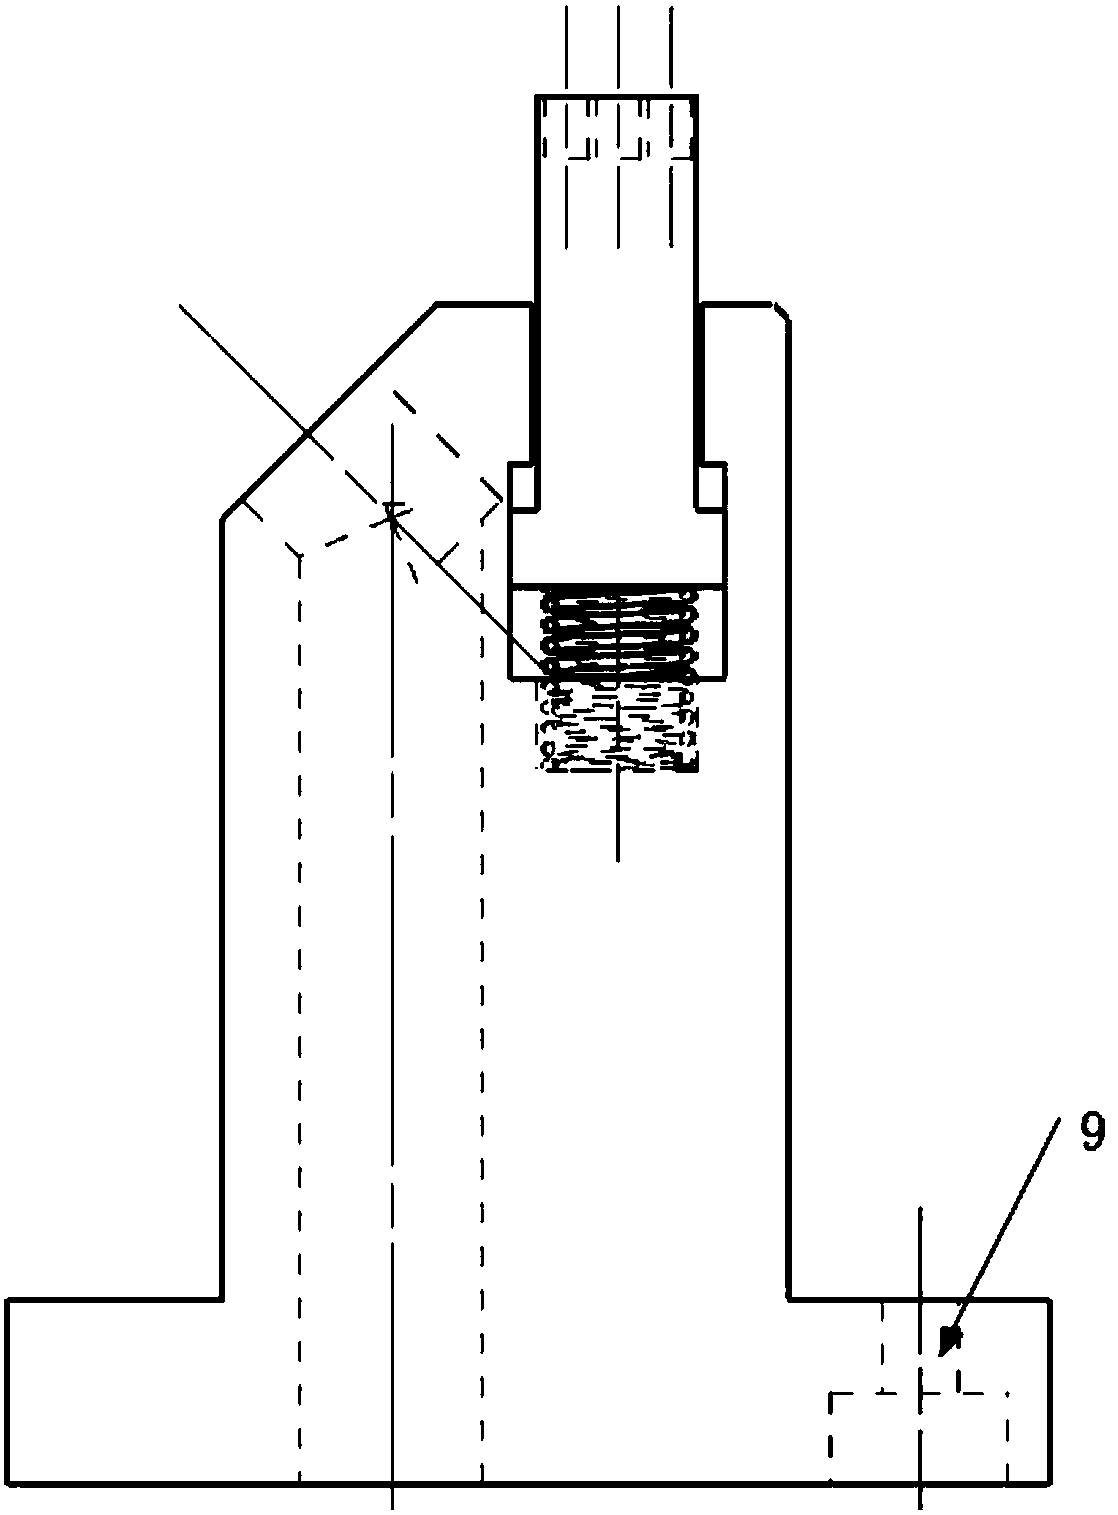 Tilting-pad sliding bearing nozzle with elastic thermal oil partition devices